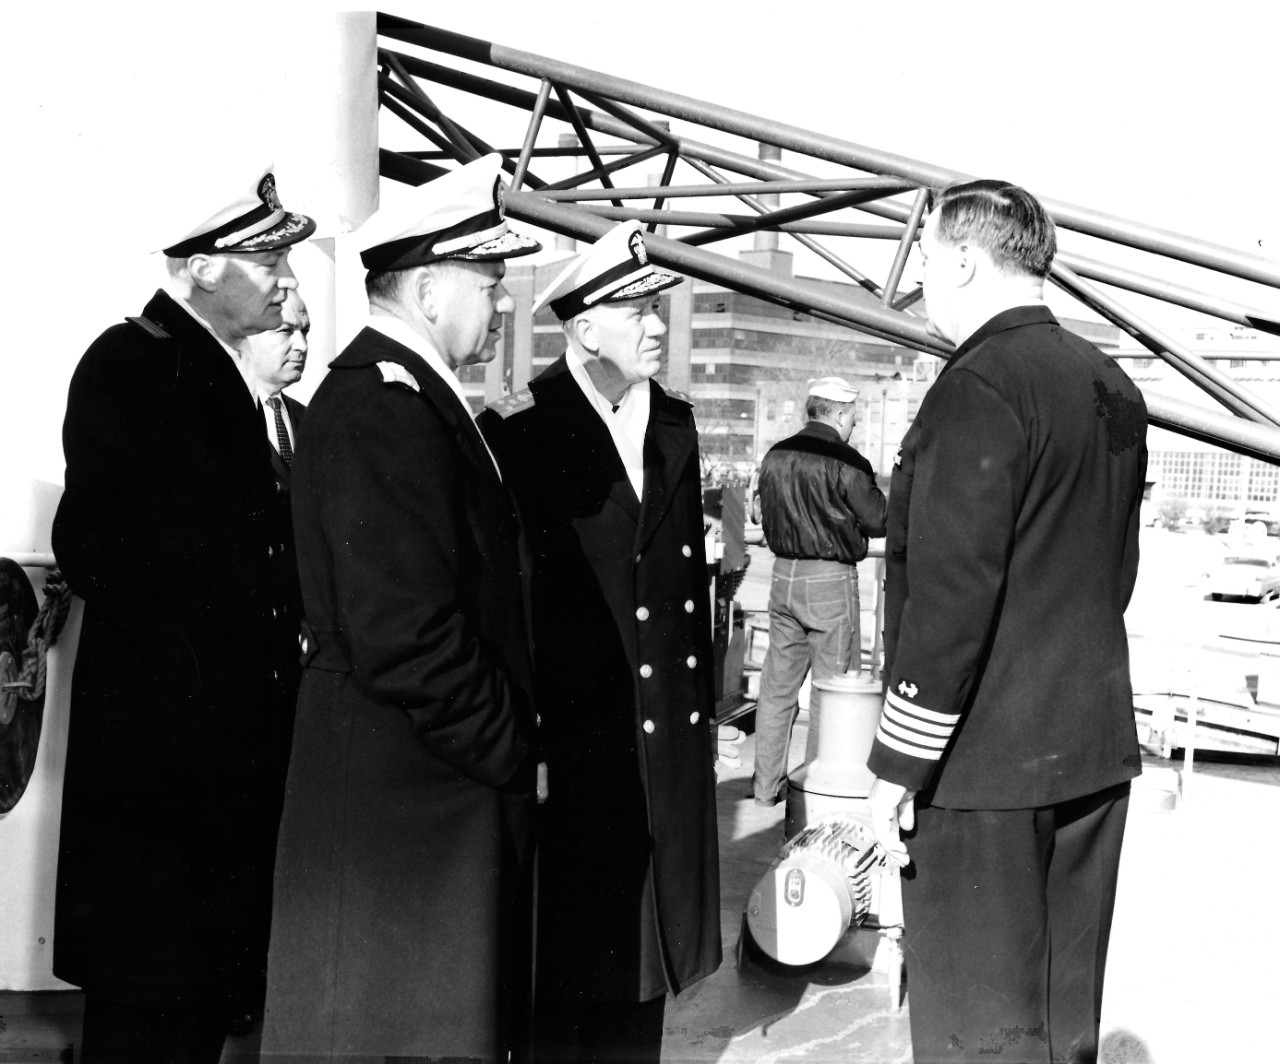 NMUSN-23:   USNS James. M. Gilliss (T-AGOR-4), December 1962.    Naval Historical Display Center’s Director, Captain Slade D. Cutter, USN, discusses with Vice Admiral Roy A. Gano, USN, Commander, Military Sea Transportation Service, Rear Admiral Arthur R. Gralla, Deputy Commander and Chief of Staff of Military Sea Transportation Service, and Rear Admiral Edward C. Stephan, USN, the Chief Oceanographer of the Naval Oceanographic Office on board the oceanographic research ship.   National Museum of the U.S. Navy Photograph Collection.    